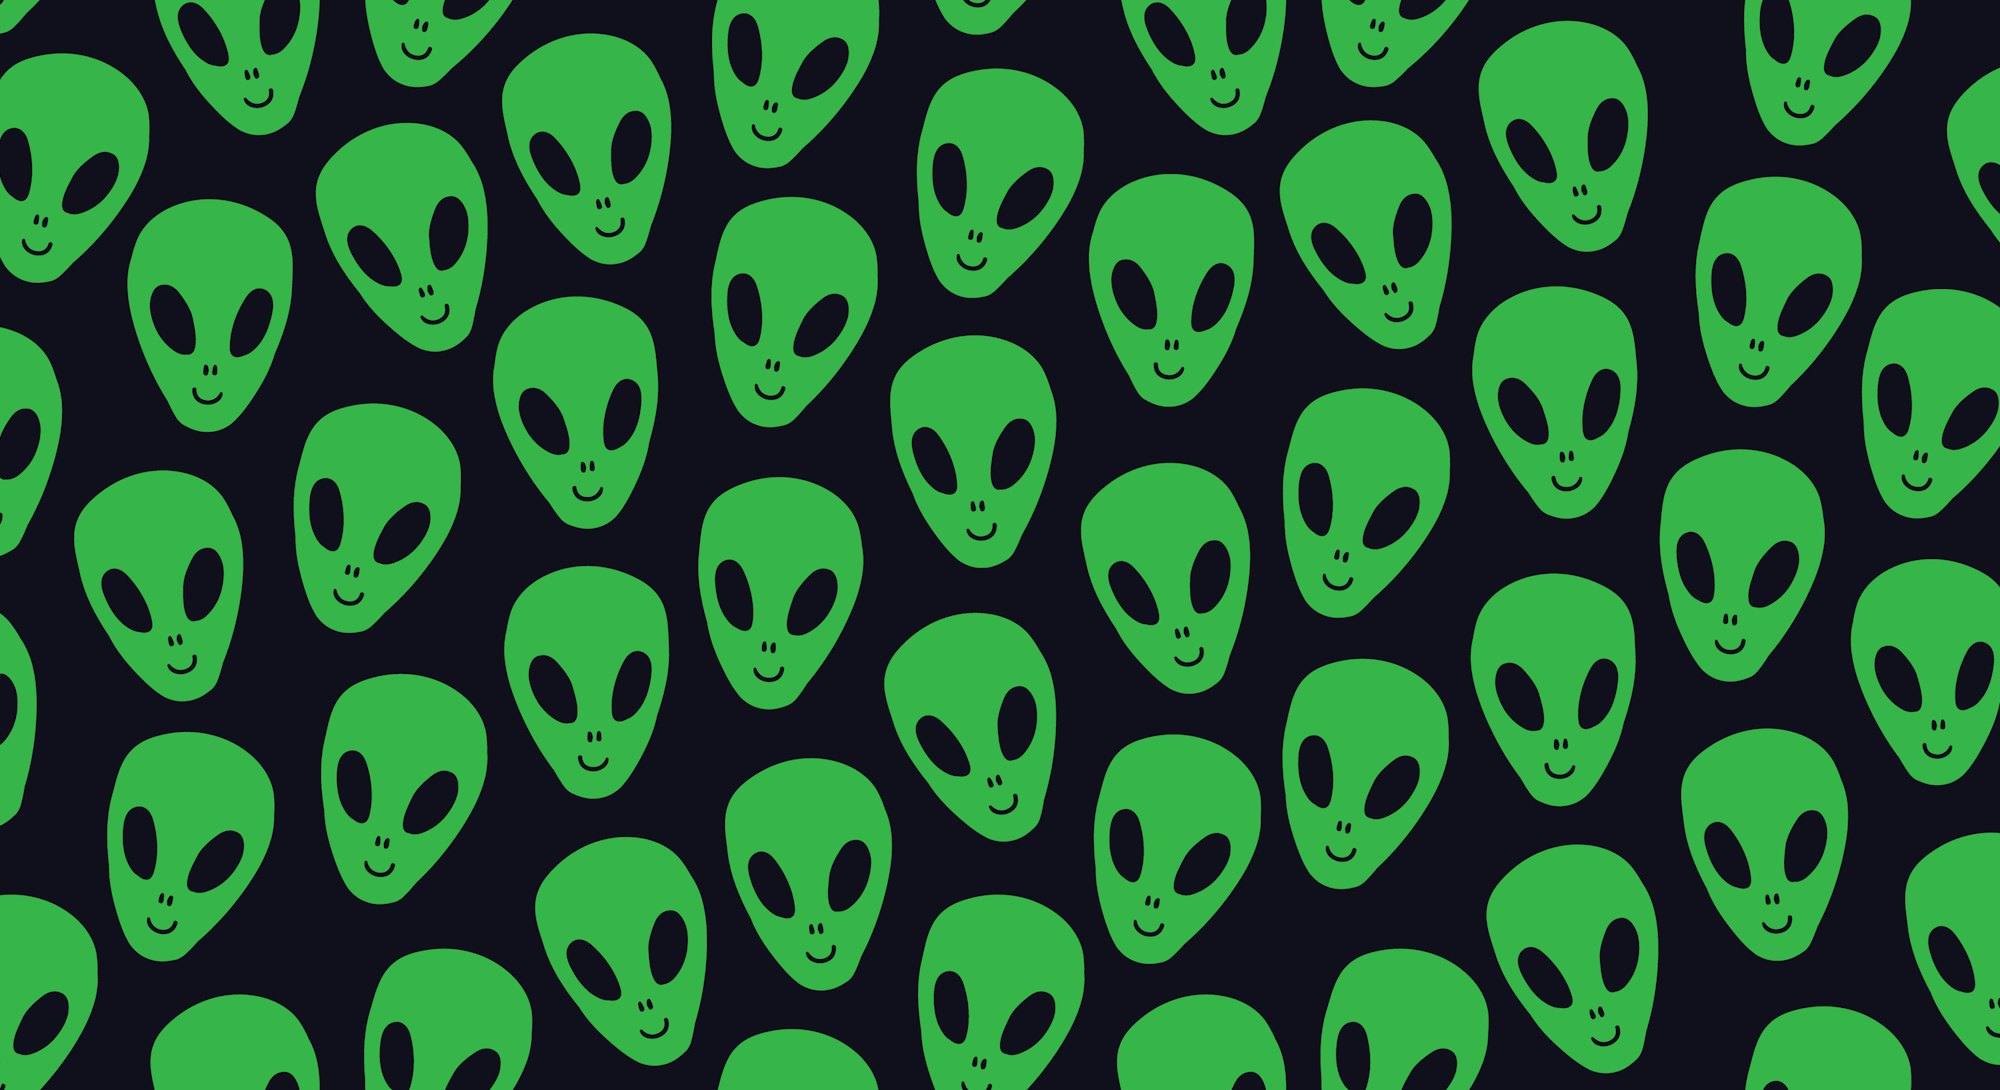 Childish seamless pattern with aliens faces ufo. Sci-fi pattern on dark background. Hand drawn doodl...